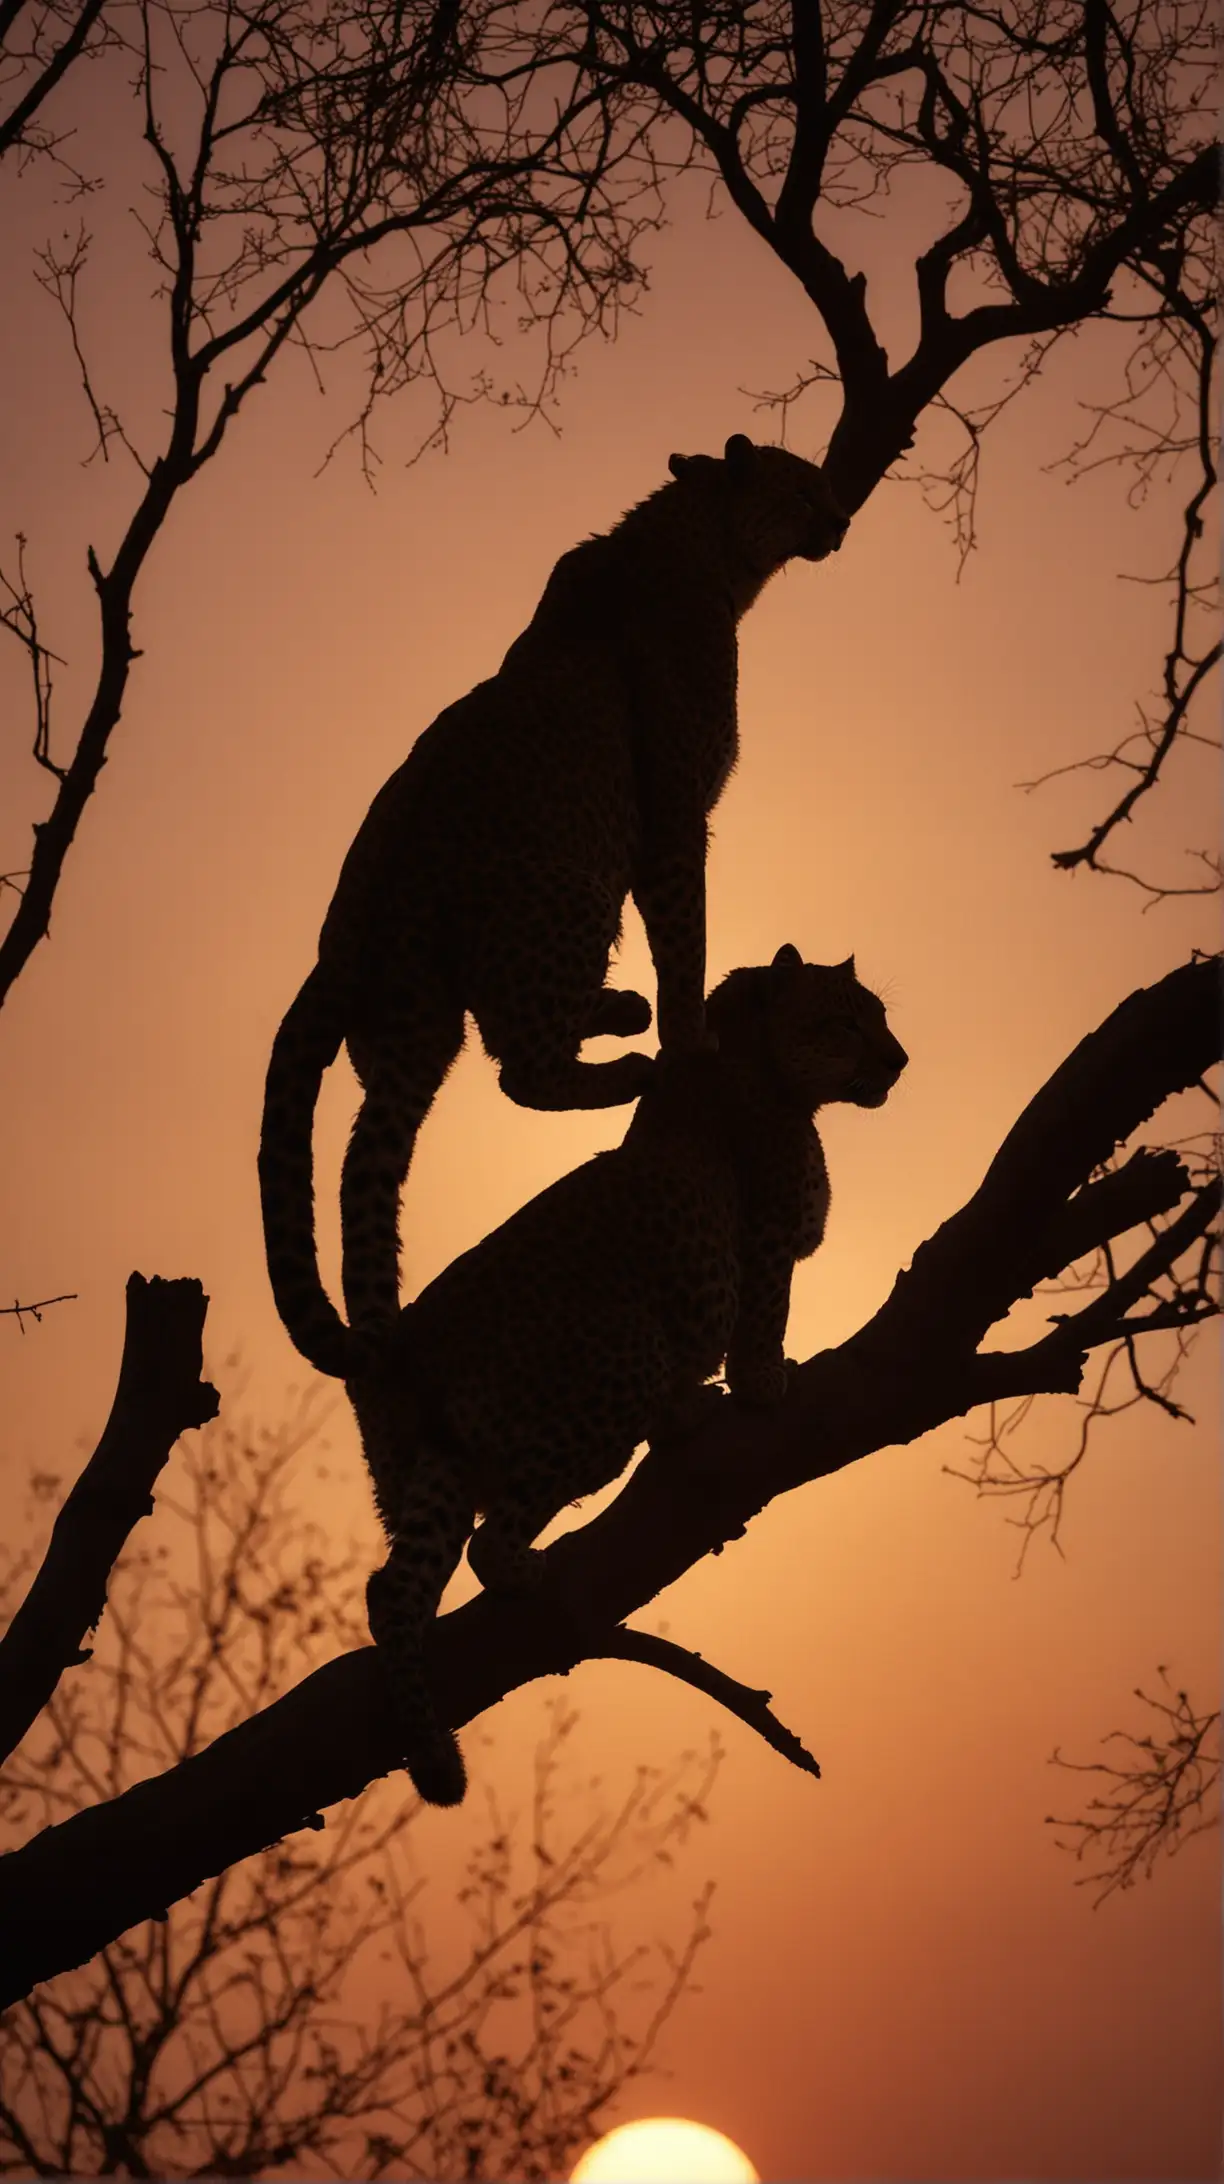 Silhouette of Leopard on Tree Branch at Sunset